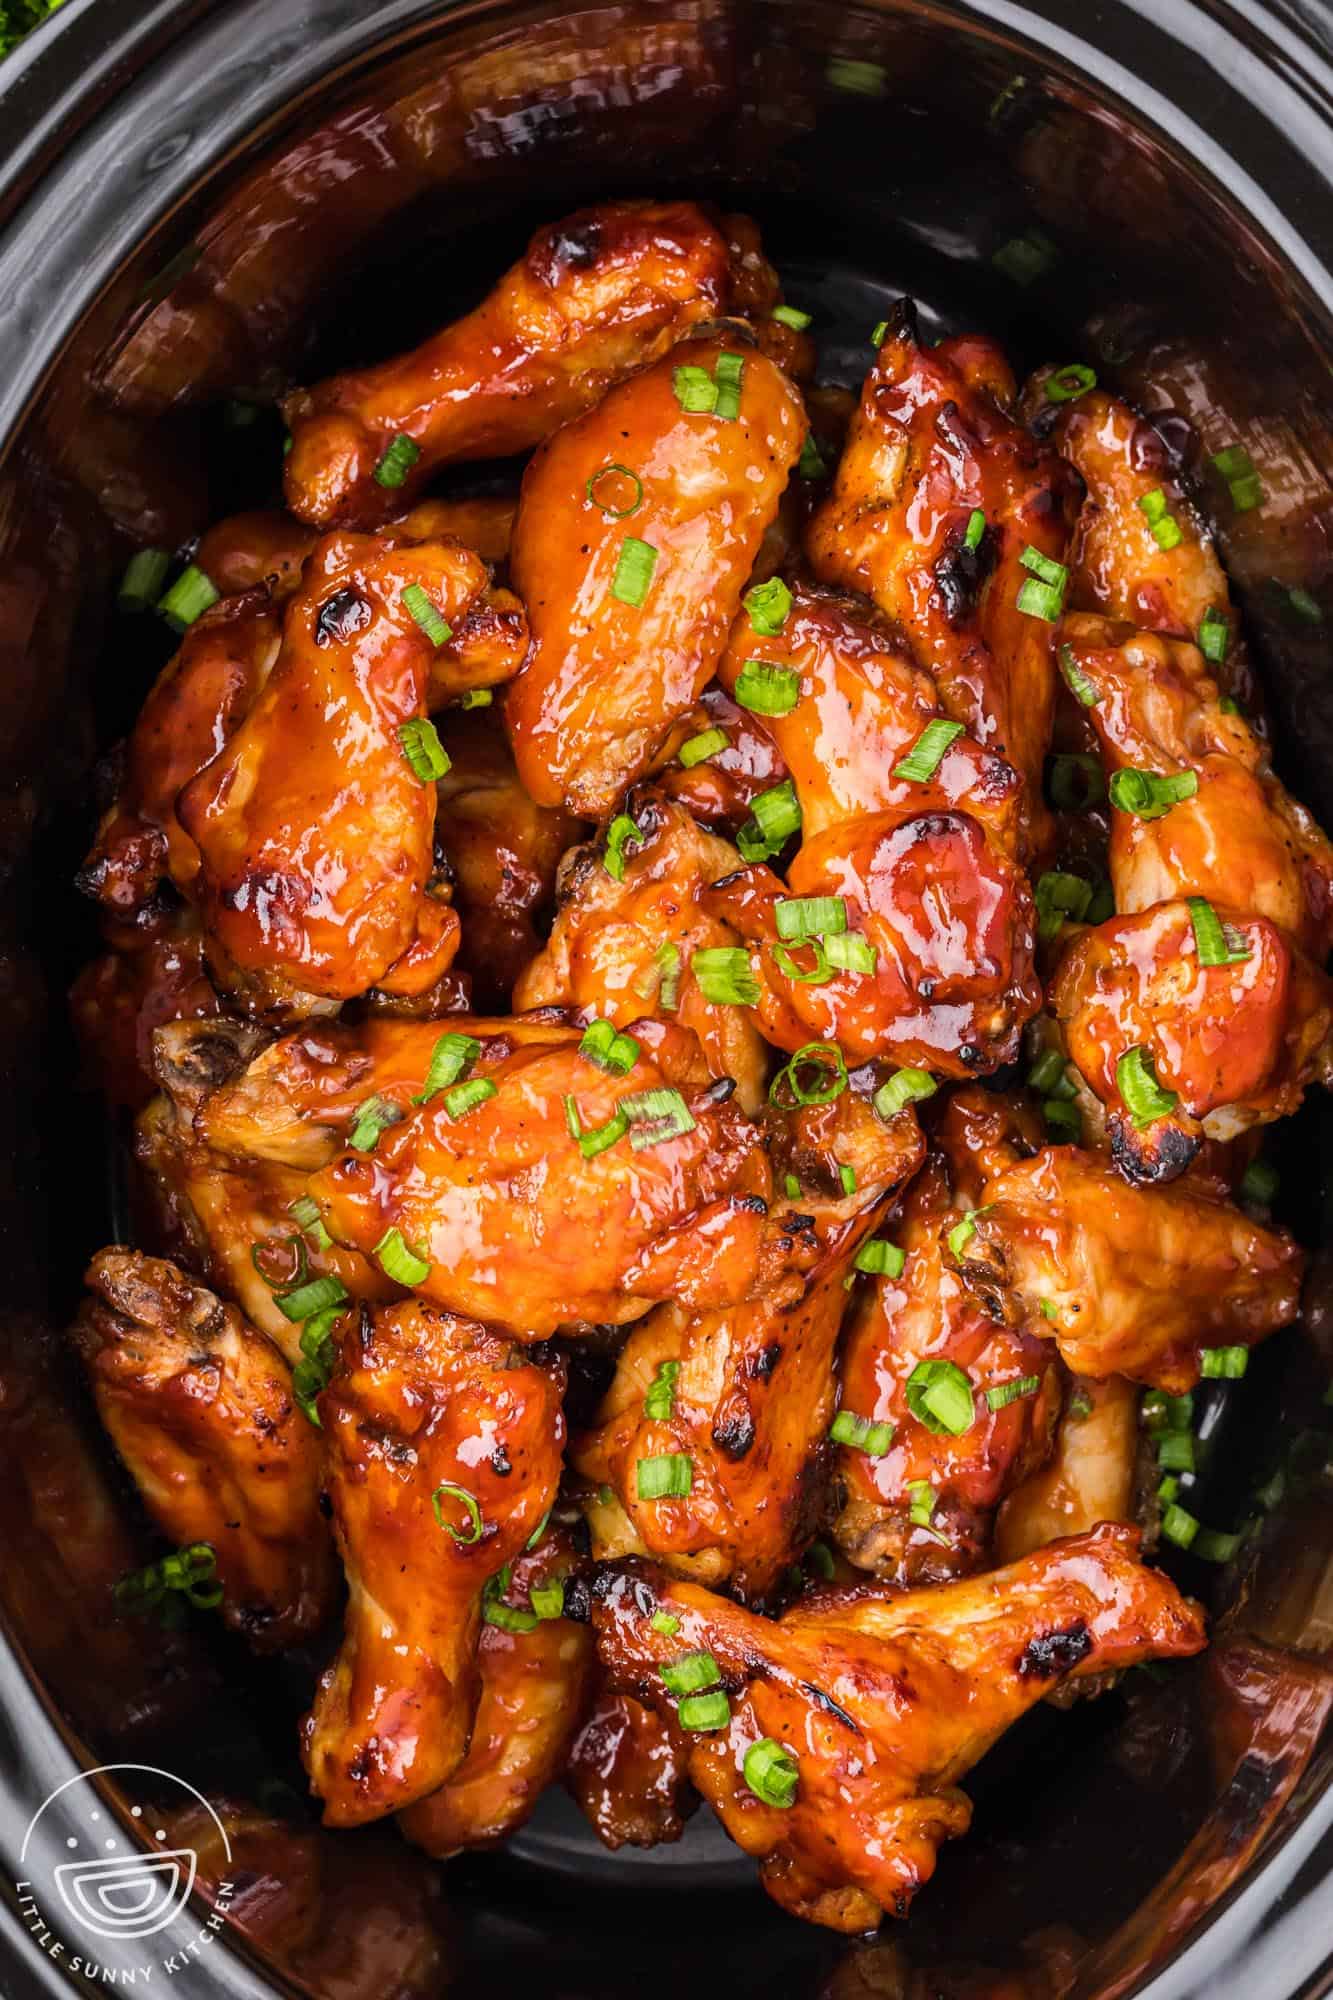 bbq chicken wings in a black slow cooker, viewed from above.